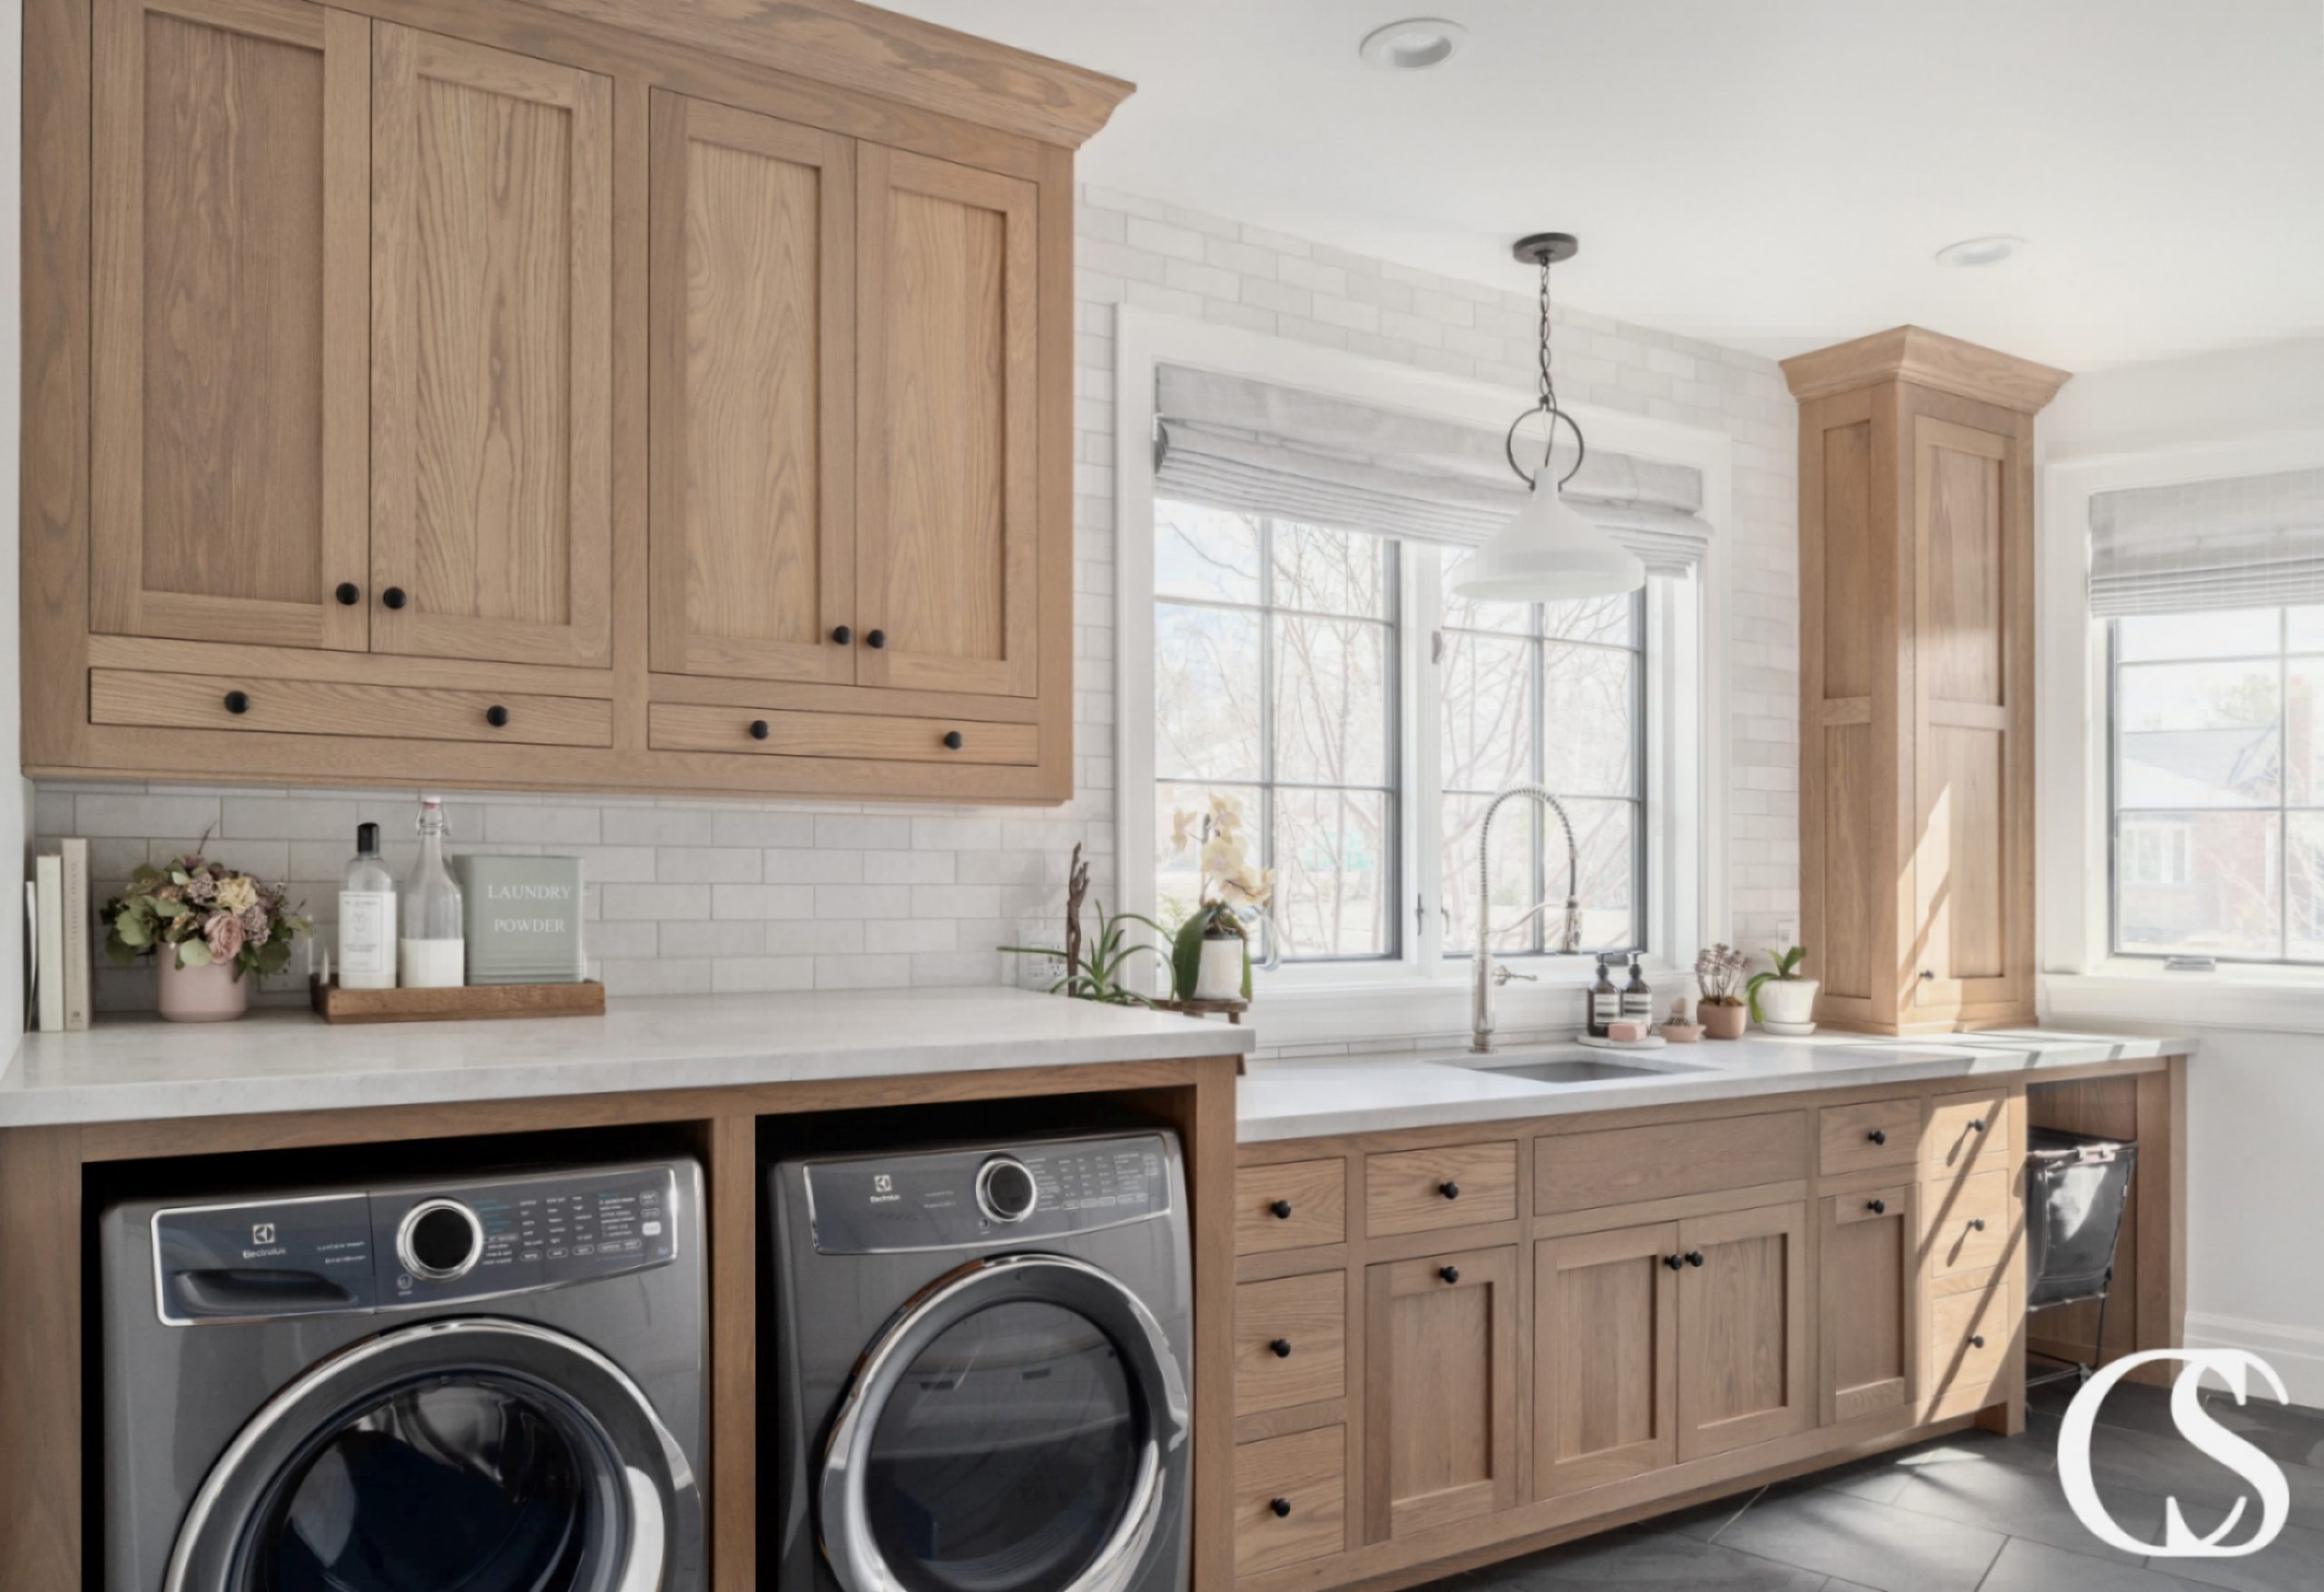 A unique and functional laundry room featuring natural wood cabinets that provide ample storage space, natural wood finish gives a warm and rustic touch, and built-in countertop for folding clothes, making it a perfect combination of style and functionality